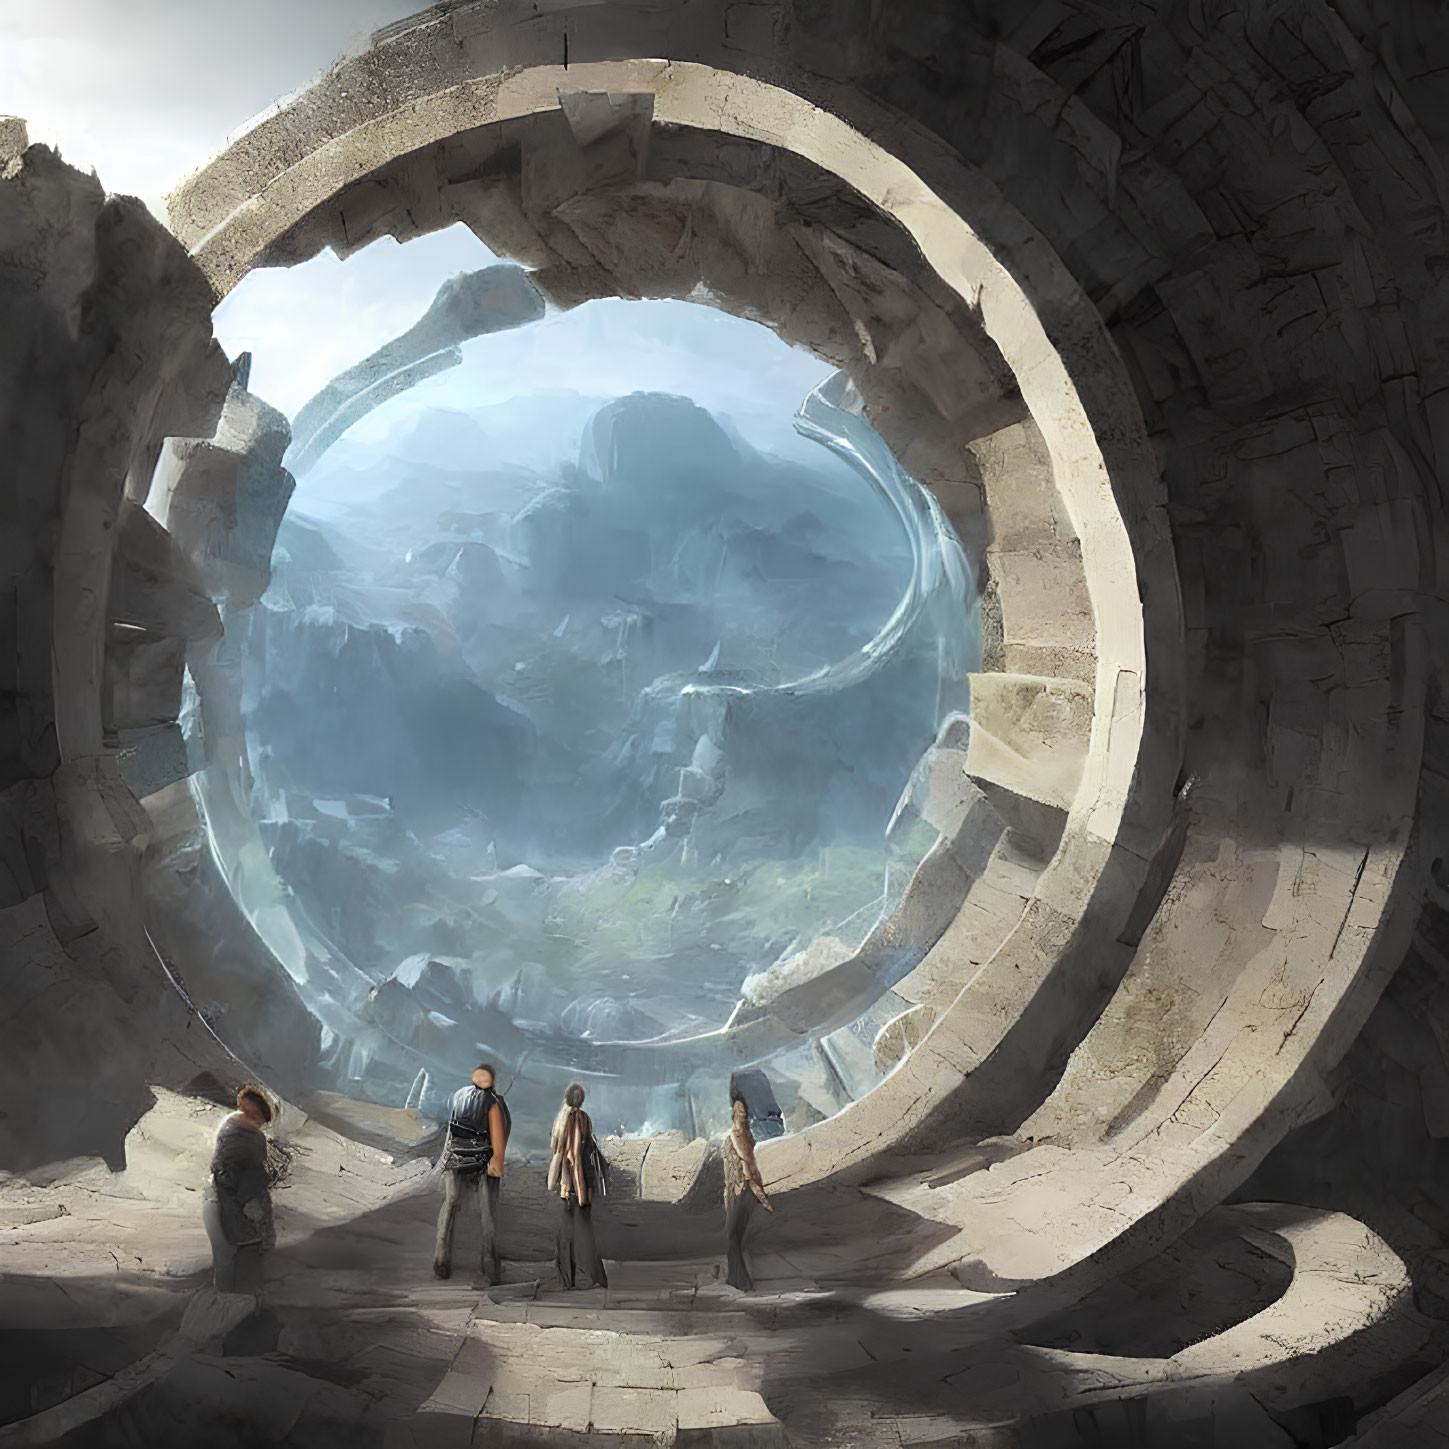 Explorers in front of ancient stone portal with misty mountain view